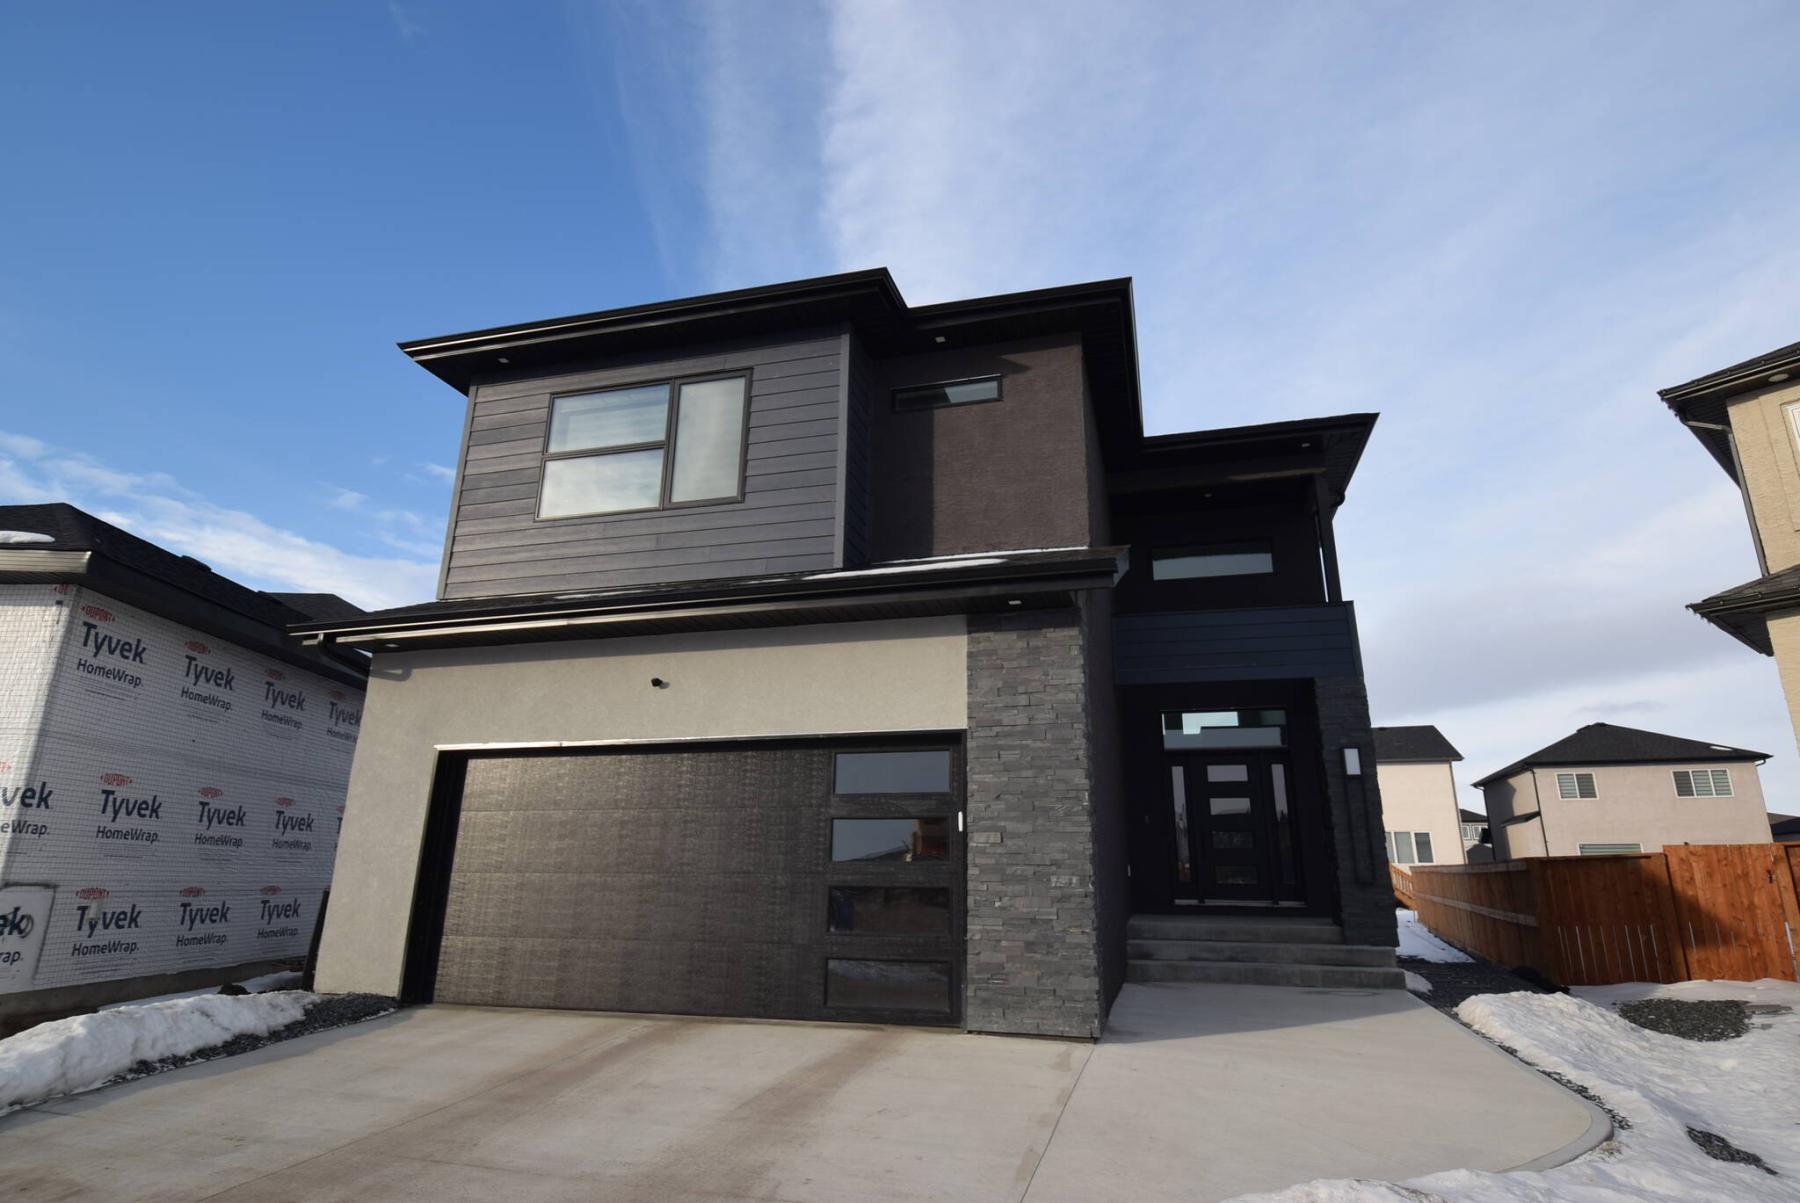  <p>Photos by Todd Lewys / Winnipeg Free Press</p>
                                <p>The custom-built two-storey is ready to go with upgraded finishes, appliances, a backyard deck and finished basement.</p> 